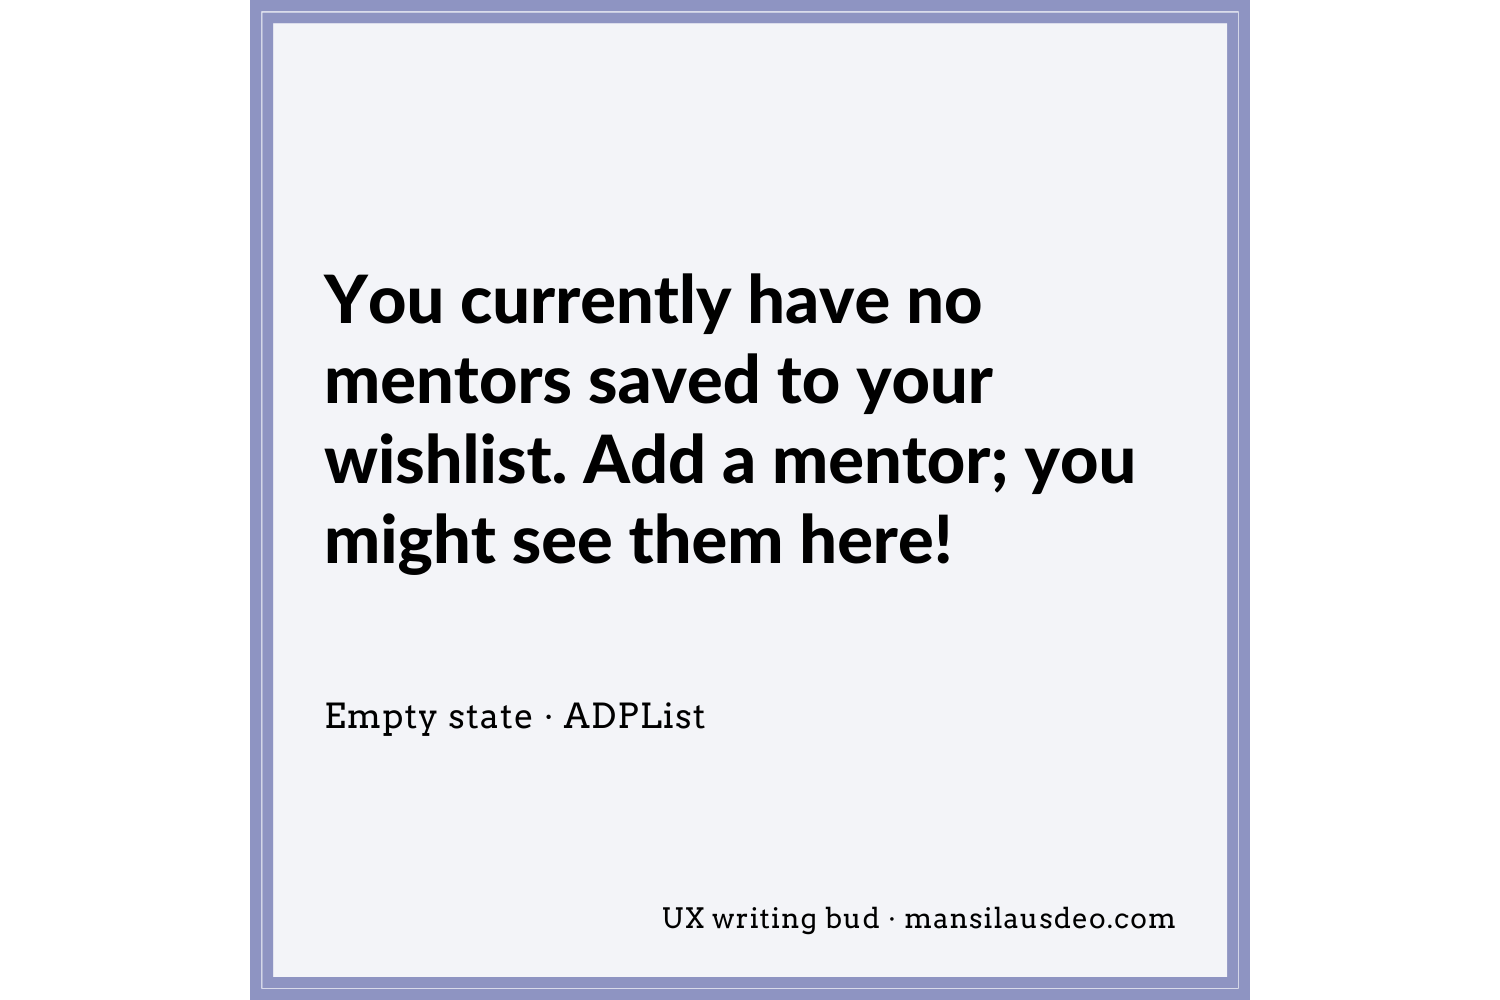 You currently have no mentors saved to your wishlist. Add a mentor; you might see them here! UX Writing Bud